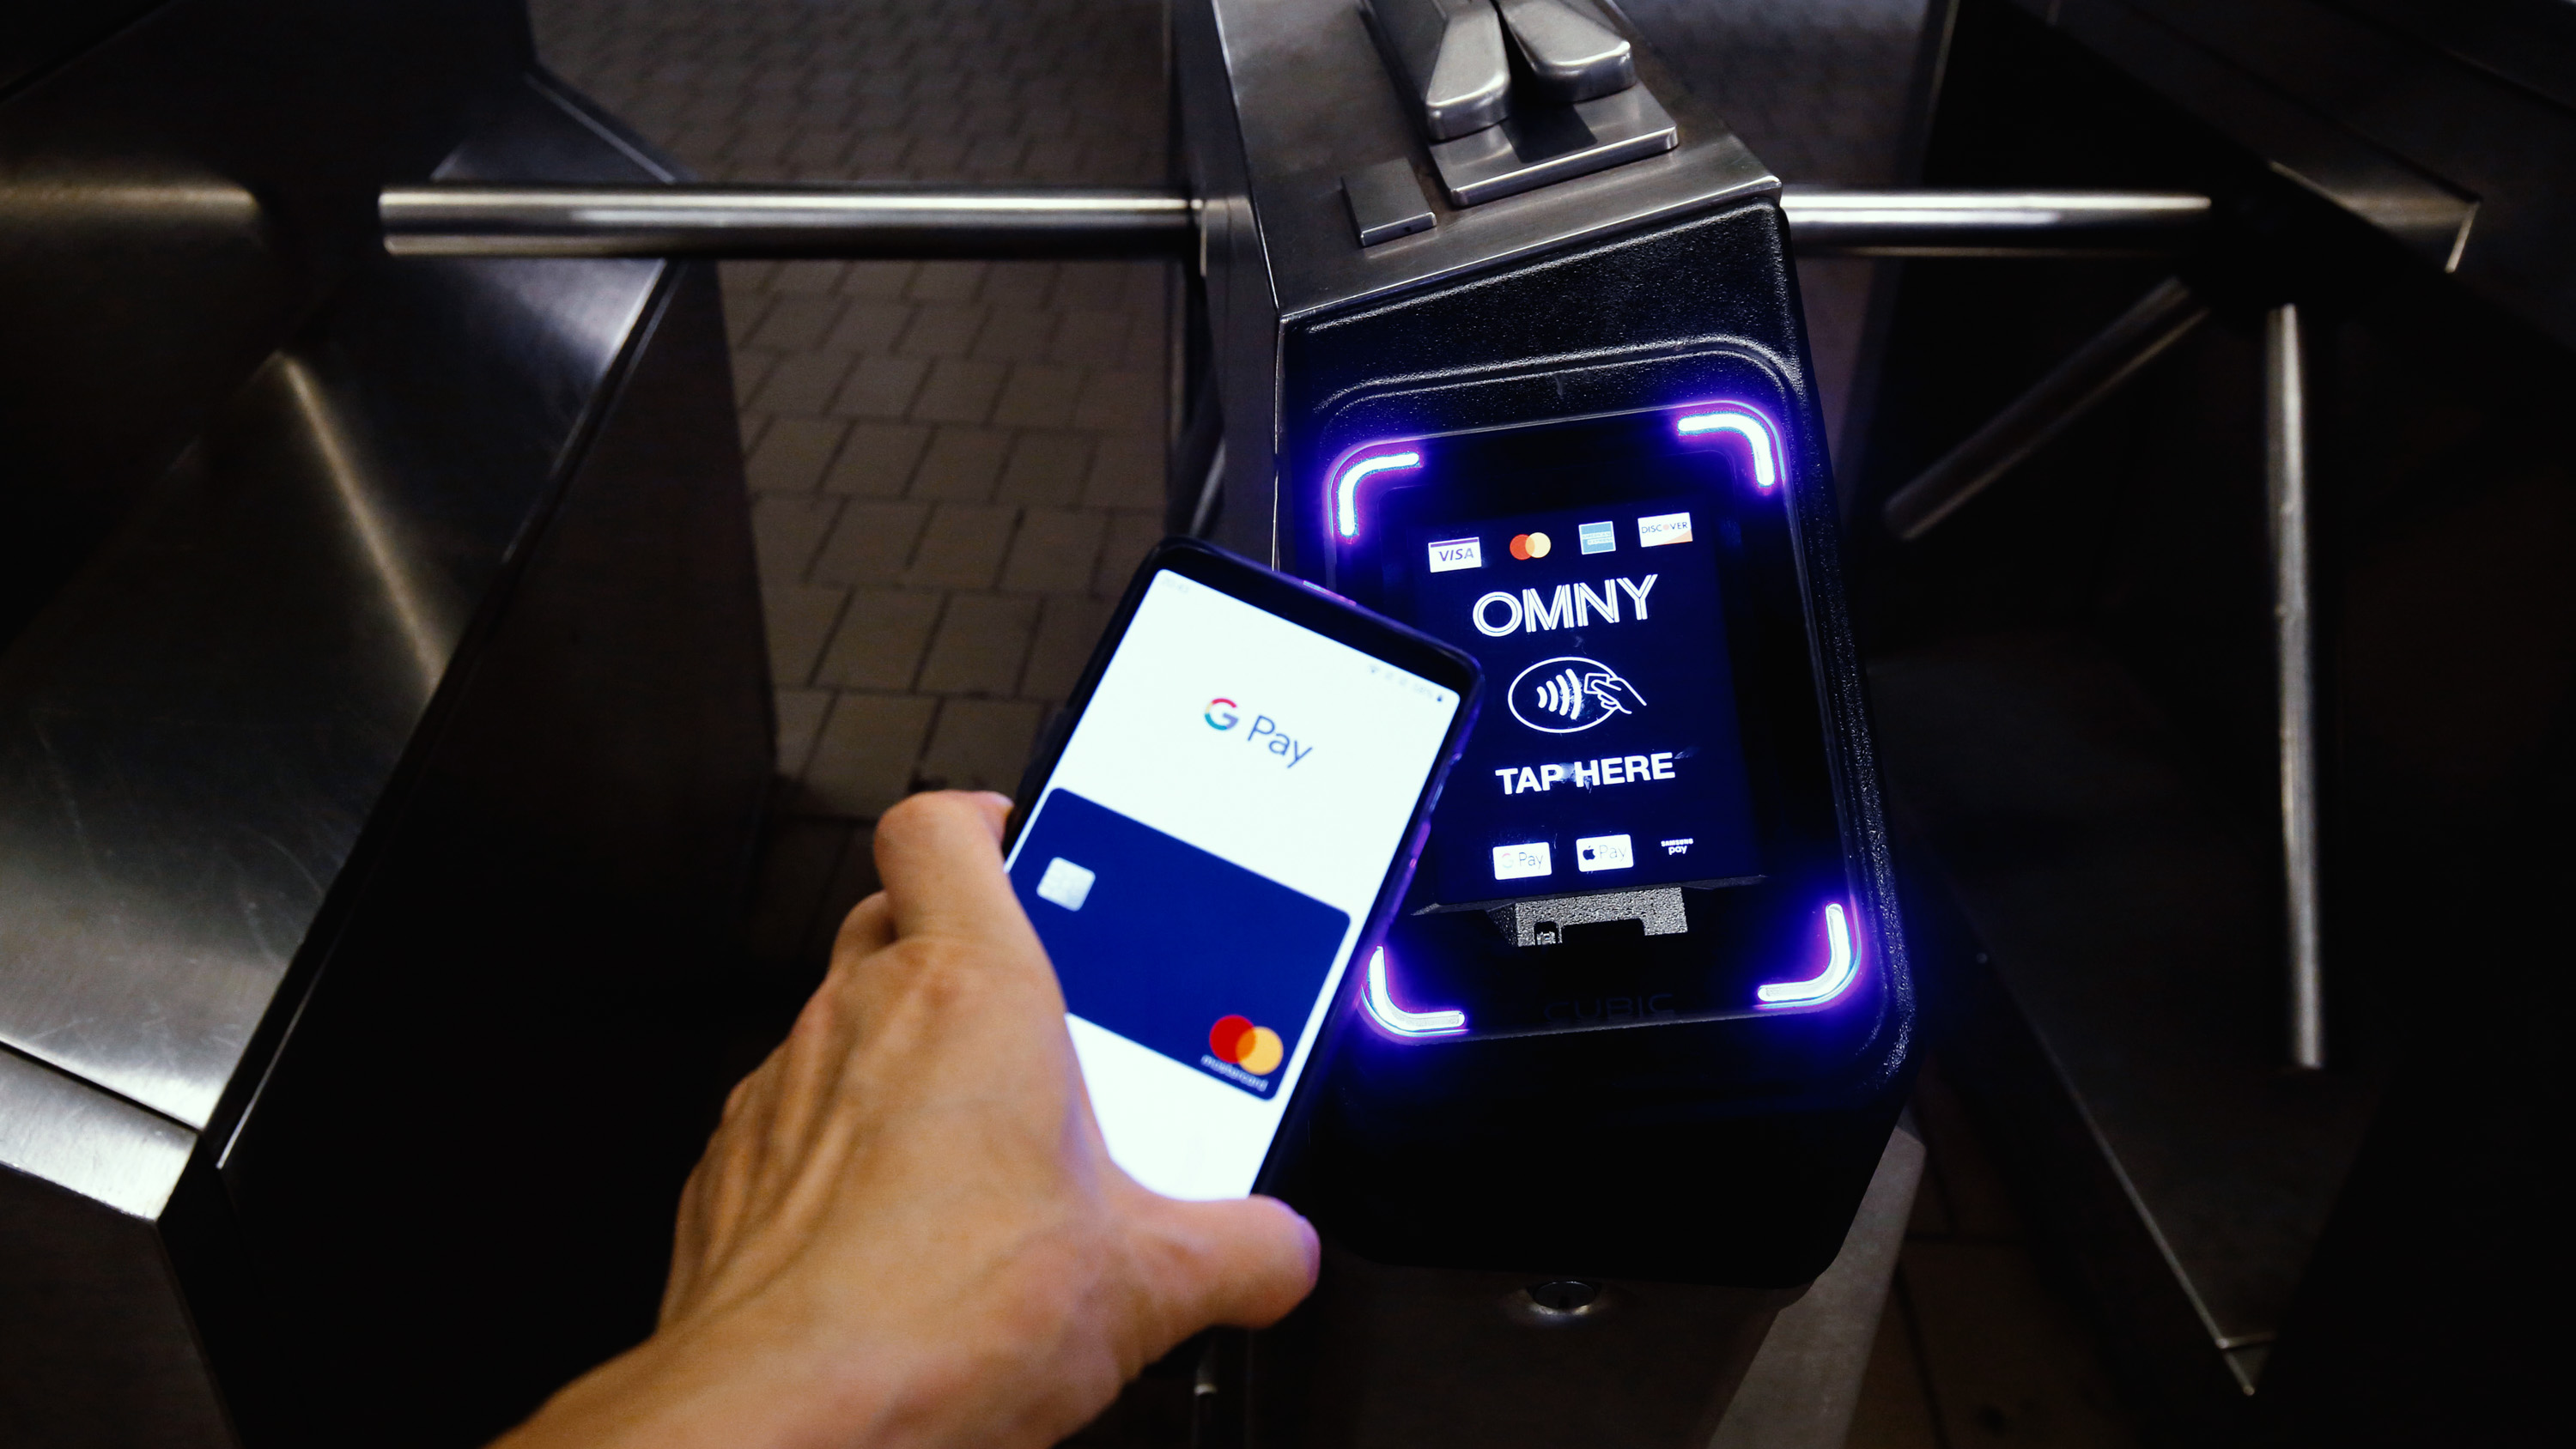 A smartphone with Google Pay taps a NYC Subway turnstile retrofitted with a contactless payment reader